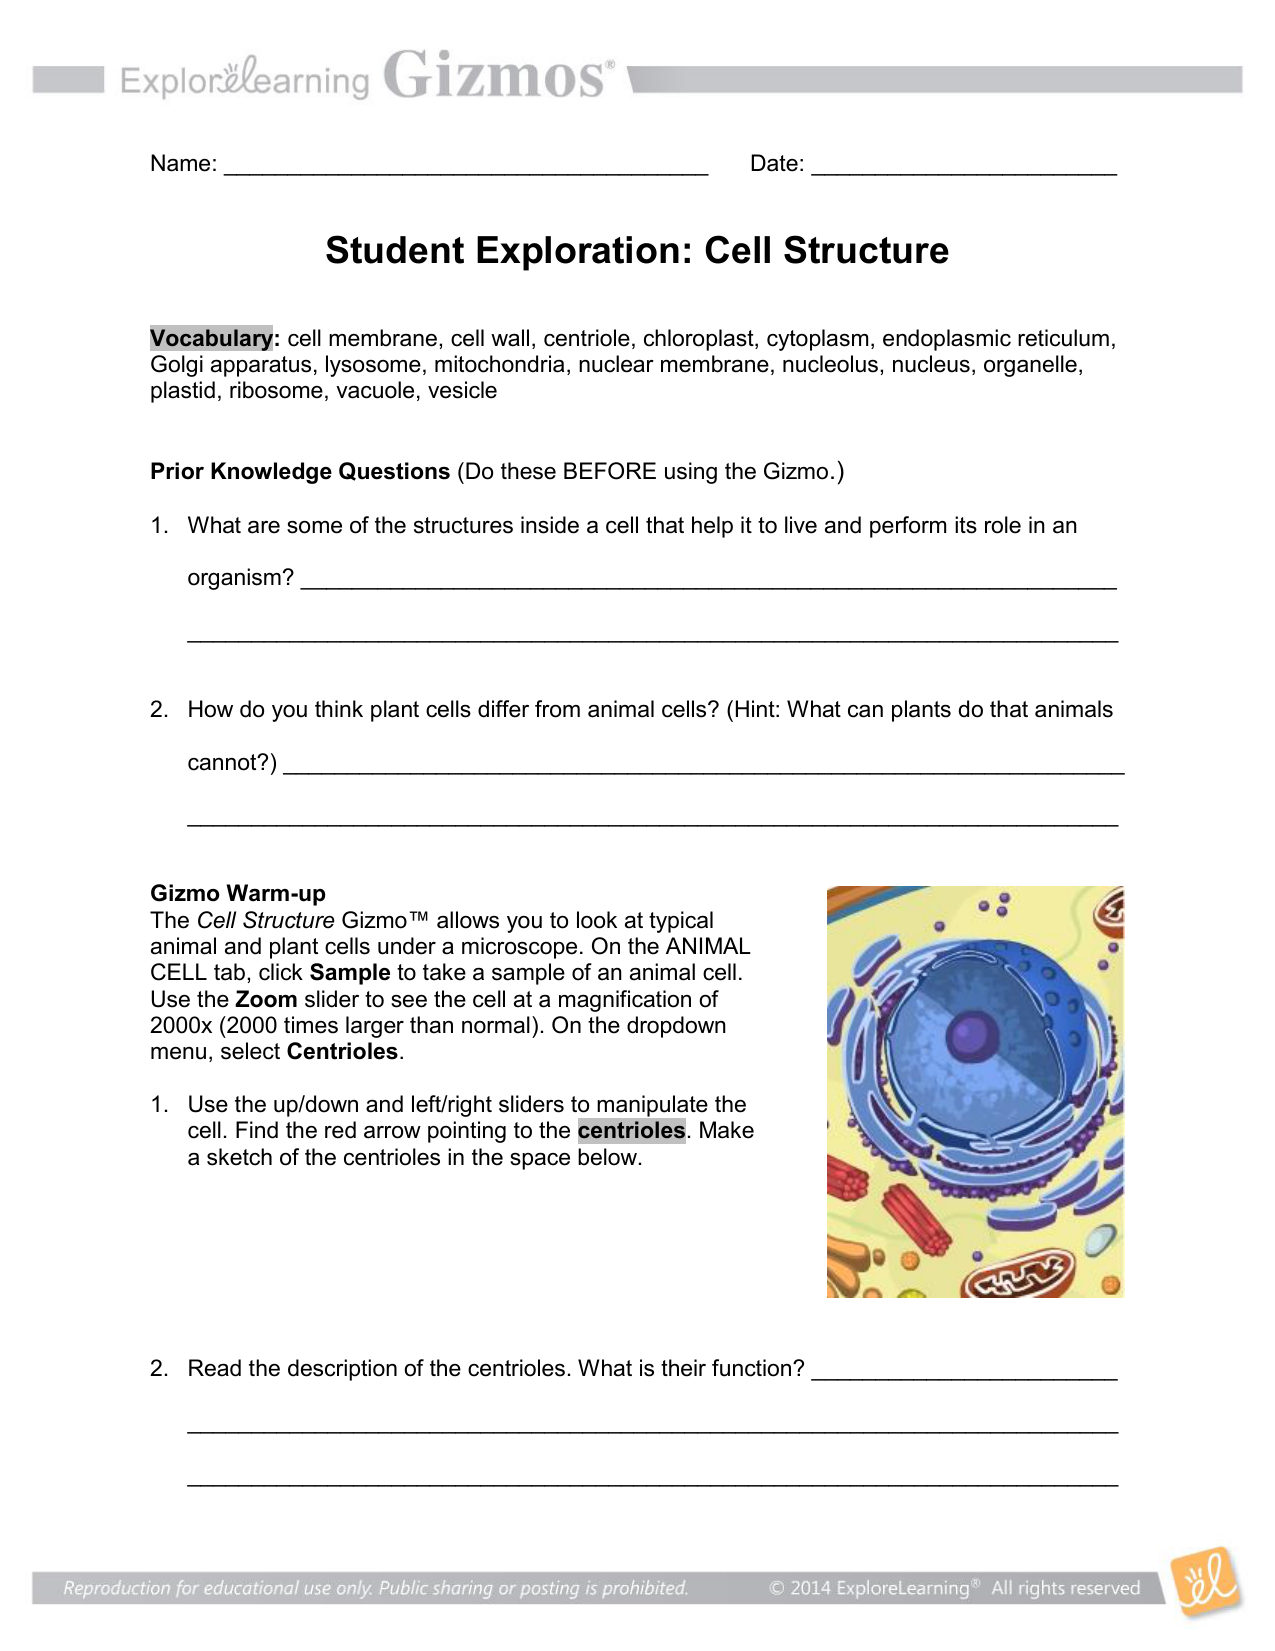 student-exploration-cell-structure-answer-key-voa